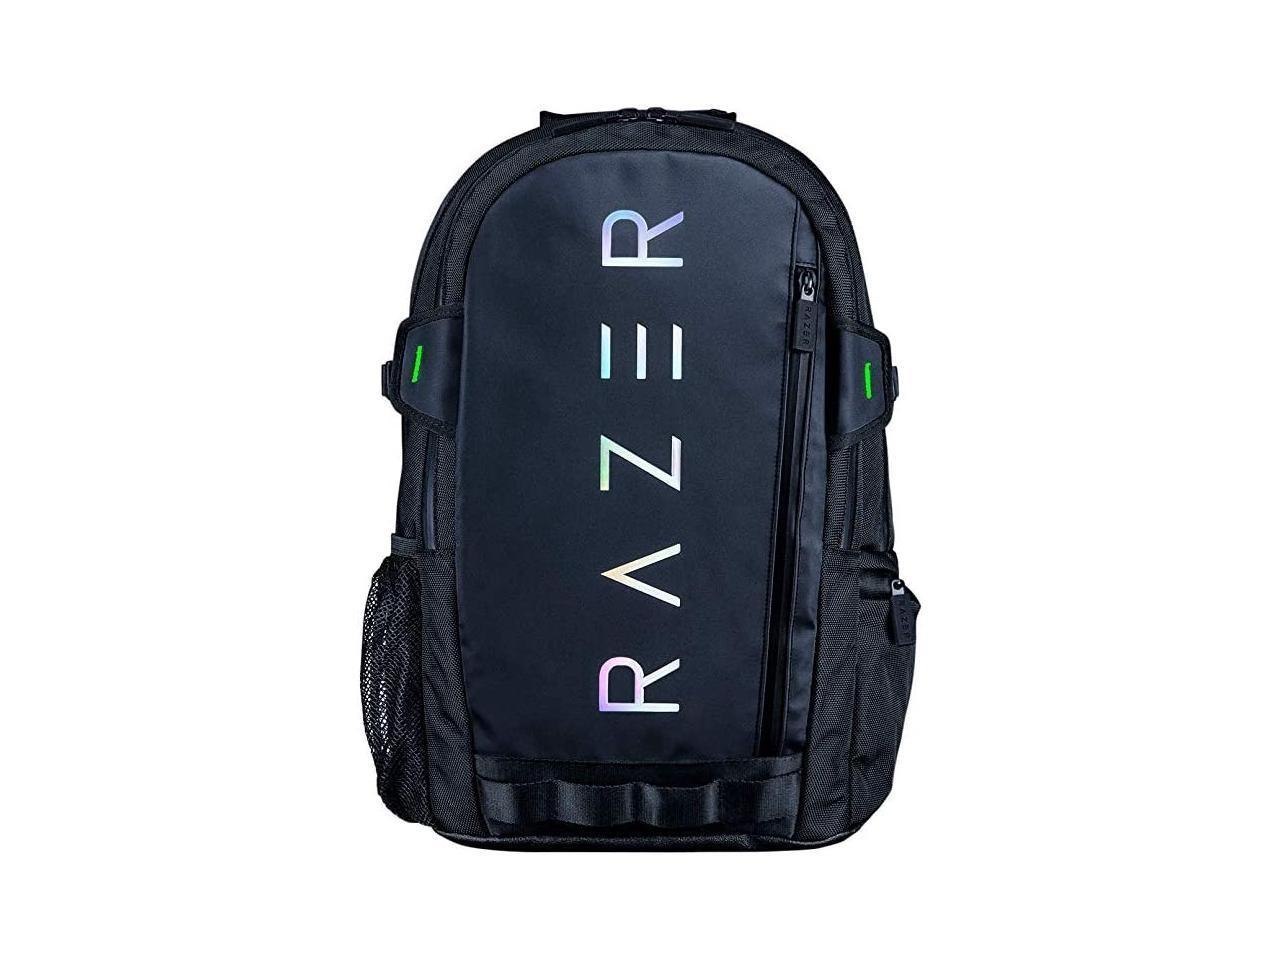 Razer Rogue V3 16" Gaming Laptop Backpack: Travel Carry On Computer Bag - Tear And Water Resistant - Mesh Side Pocket - Fits 16 Inch Notebook - Chromatic